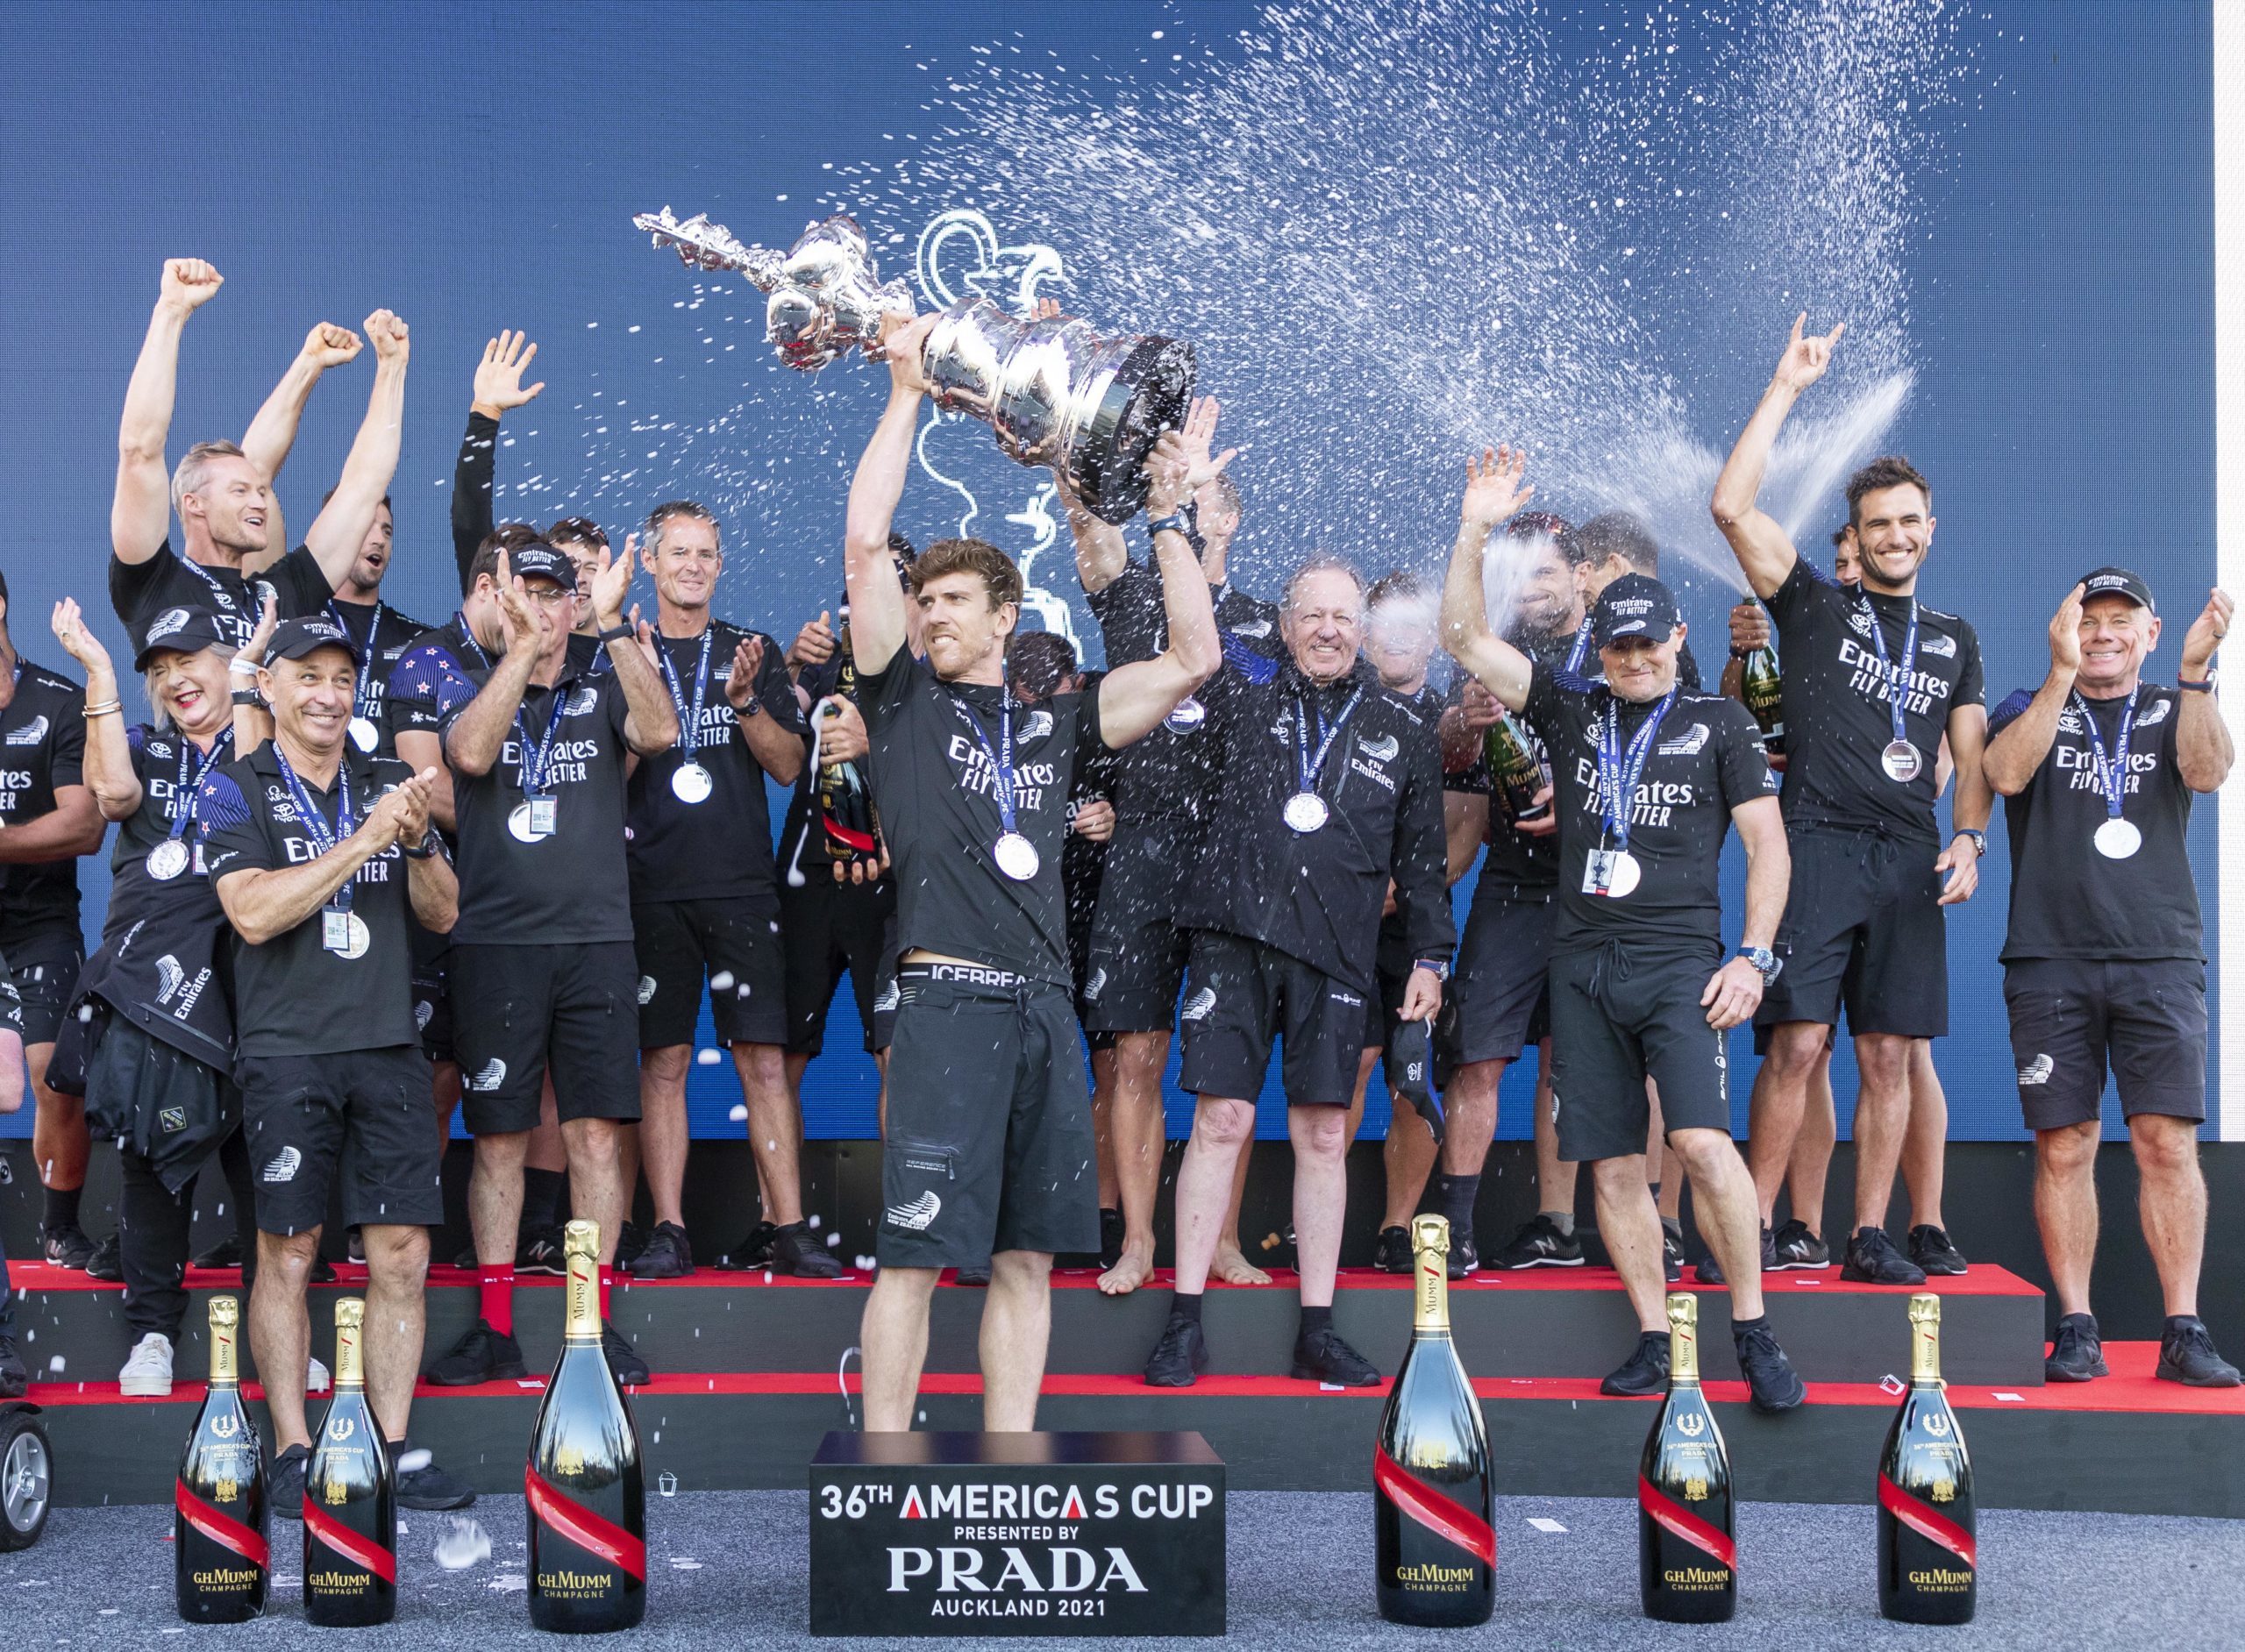 America's Cup: An inside view of Emirates Team New Zealand like you've  never seen before